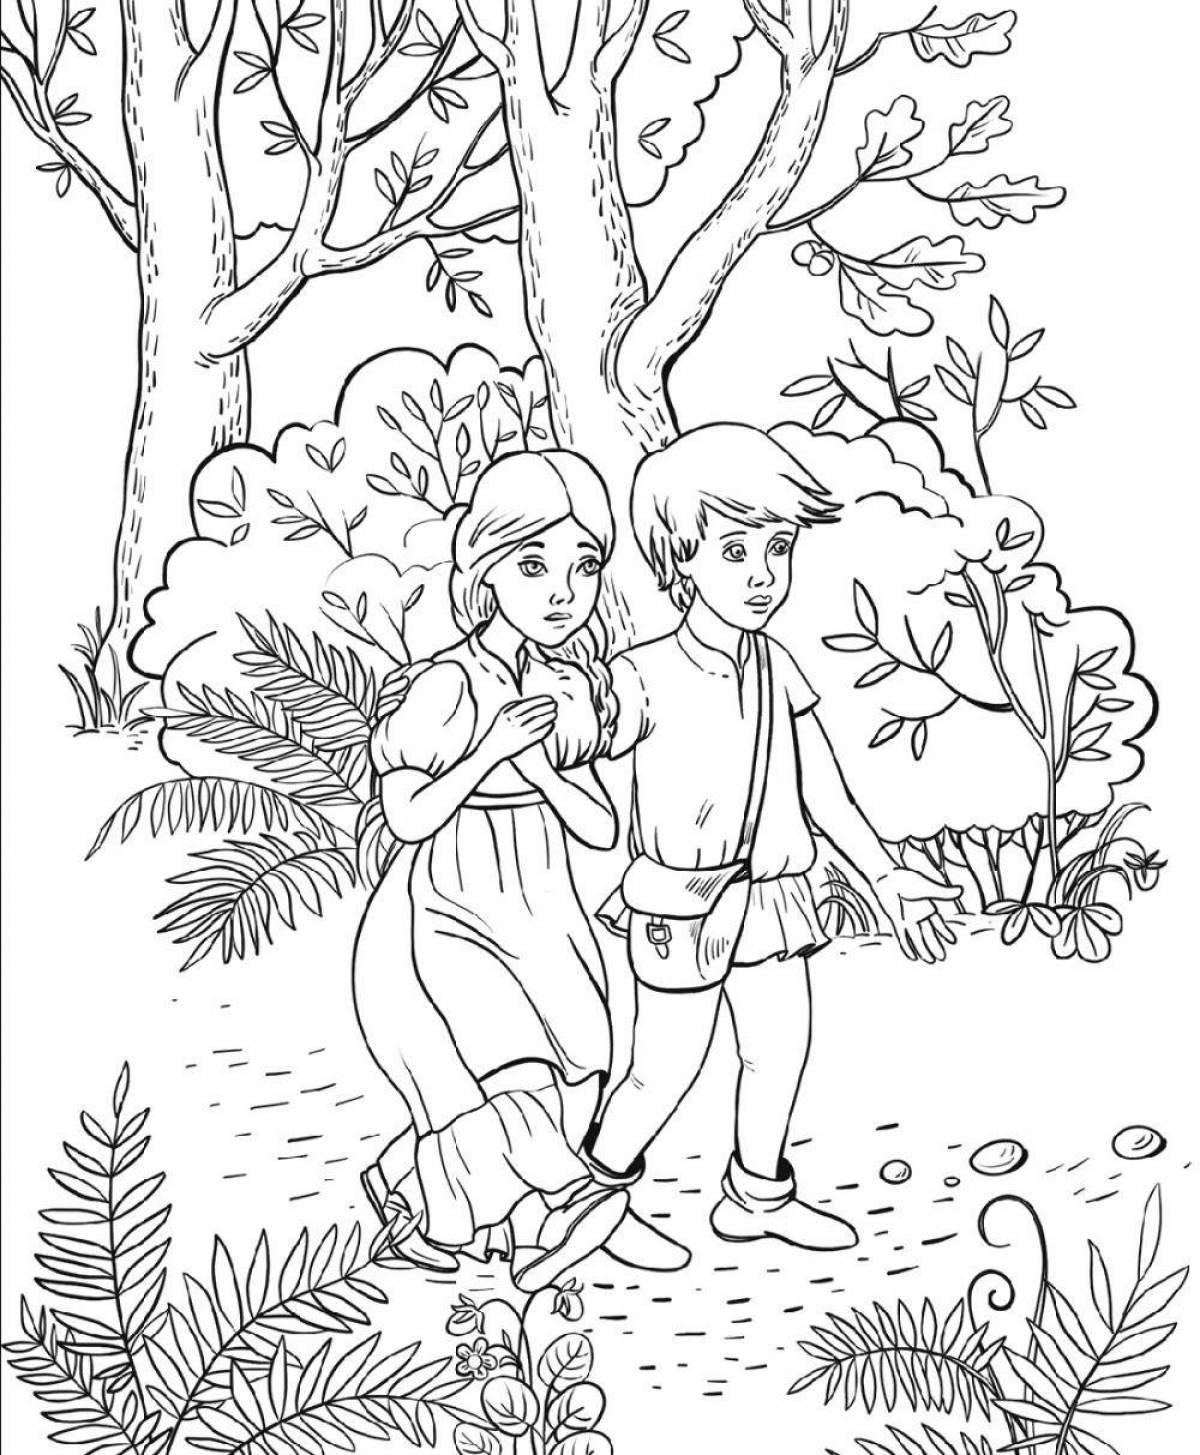 Hansel and Gretel spectacular coloring book magical agency